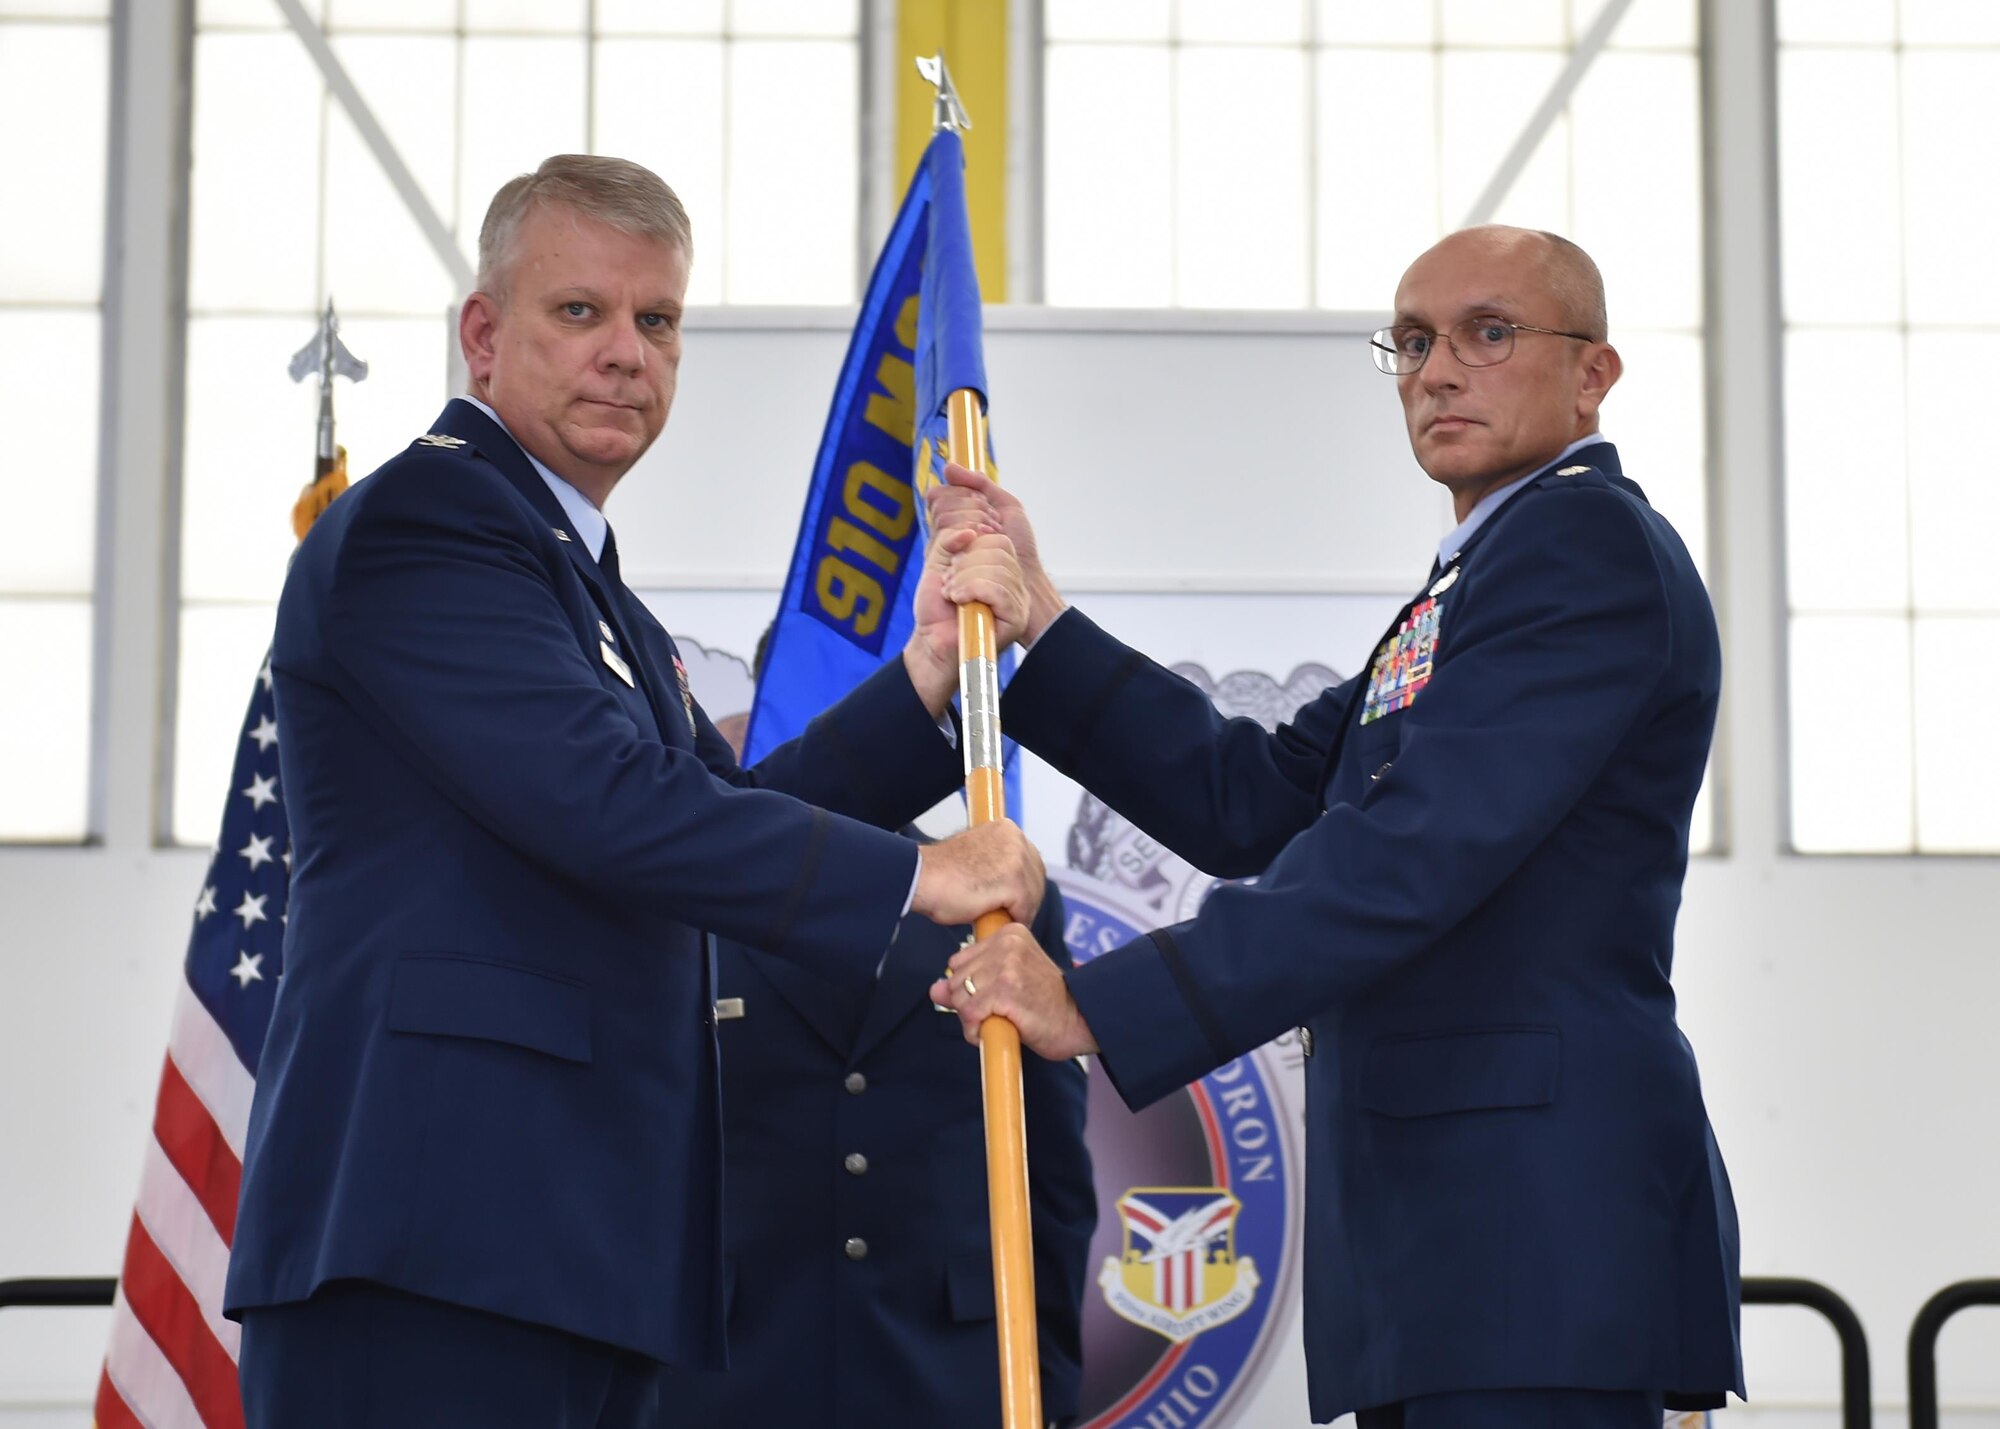 Lt. Col. Scott Stewart, new commander of the 910th Security Forces Squadron, receives a unit guidon, or flag, from Col. Donald Wren, 910th Mission Support Group commander here, Oct. 1, 2016. Stewart took command of his new squadron at a ceremony during the Unit Training Assembly (UTA). (U.S. Air Force photo/Staff Sgt. Rachel Kocin)